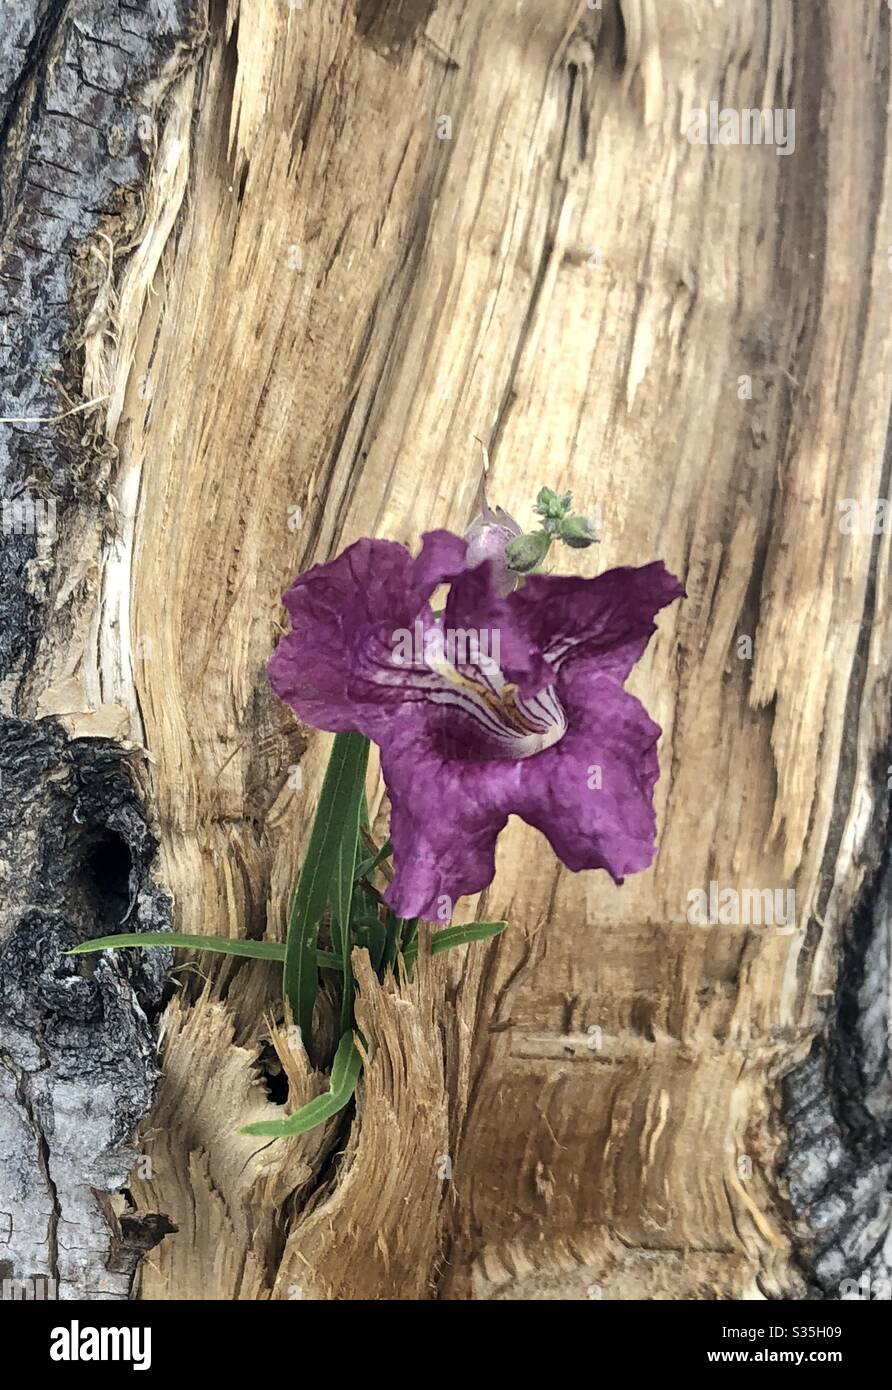 Nature, naturally unusual, small plant, purple flower, living inside tree trunk, section torn off, outer bark seen on each side, copy space Stock Photo